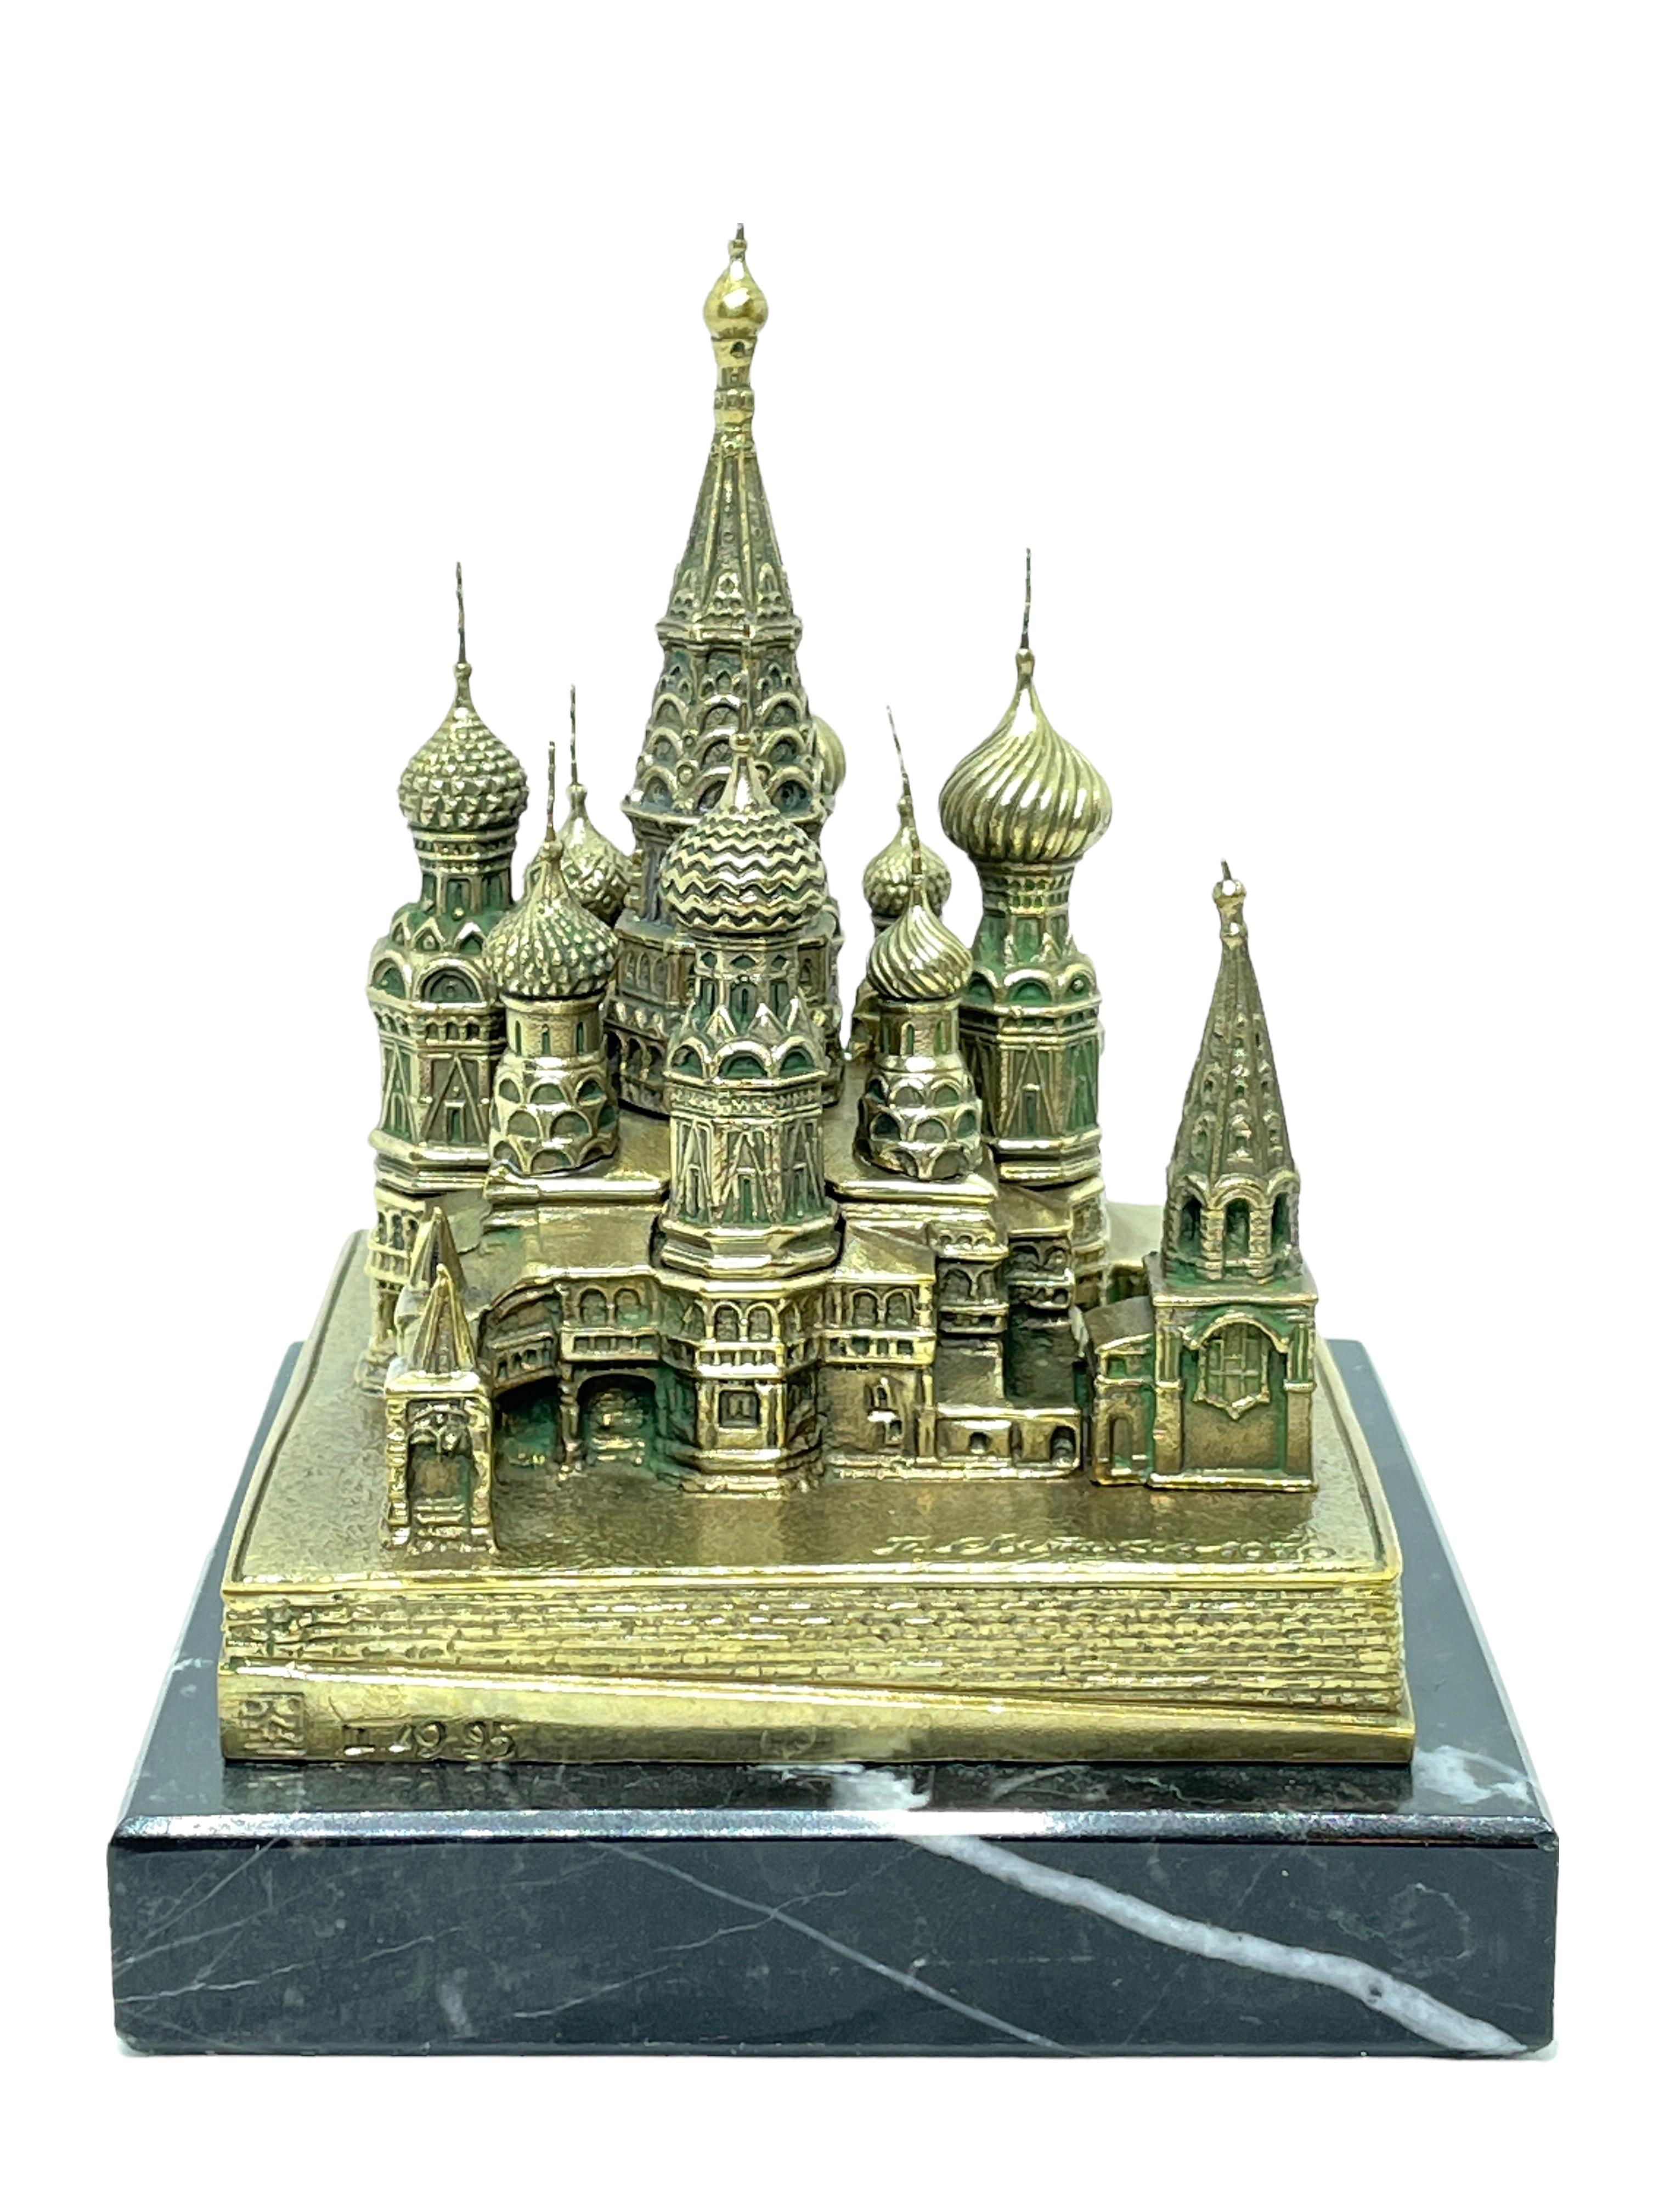 st basil's cathedral year built